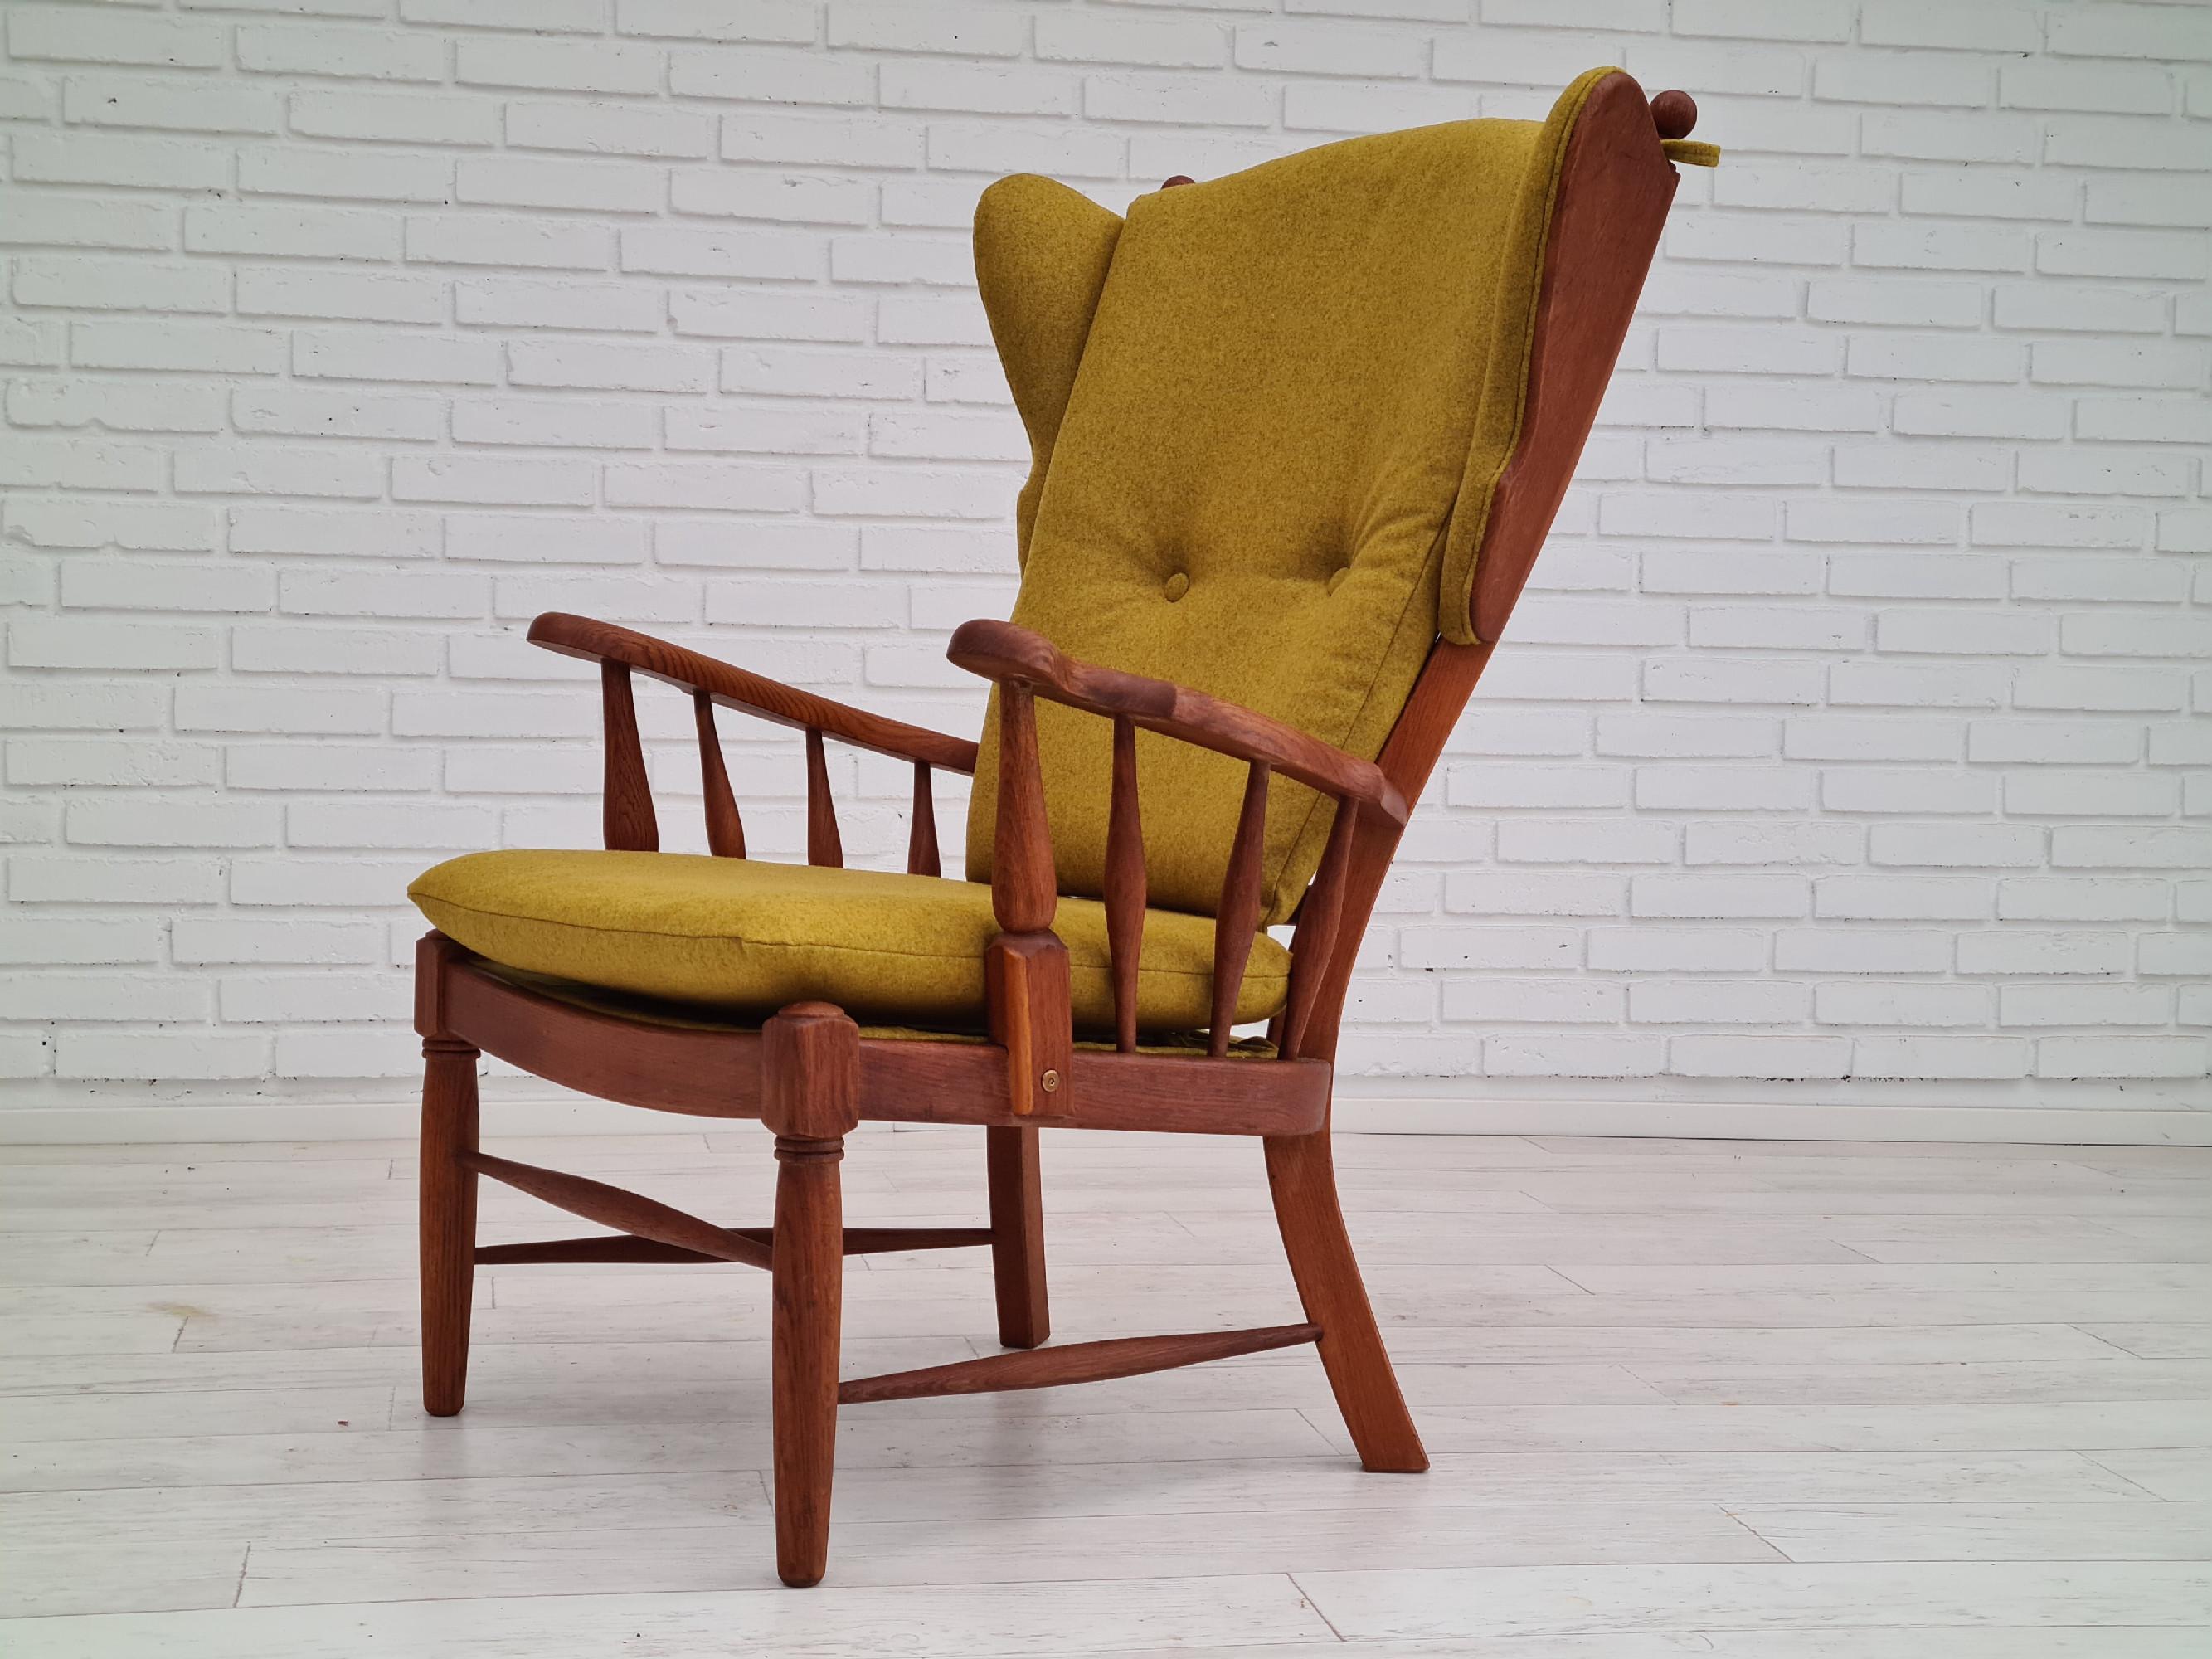 60s, reupholstered Danish high-backed ear flap chair, solid oak, furniture wool 2